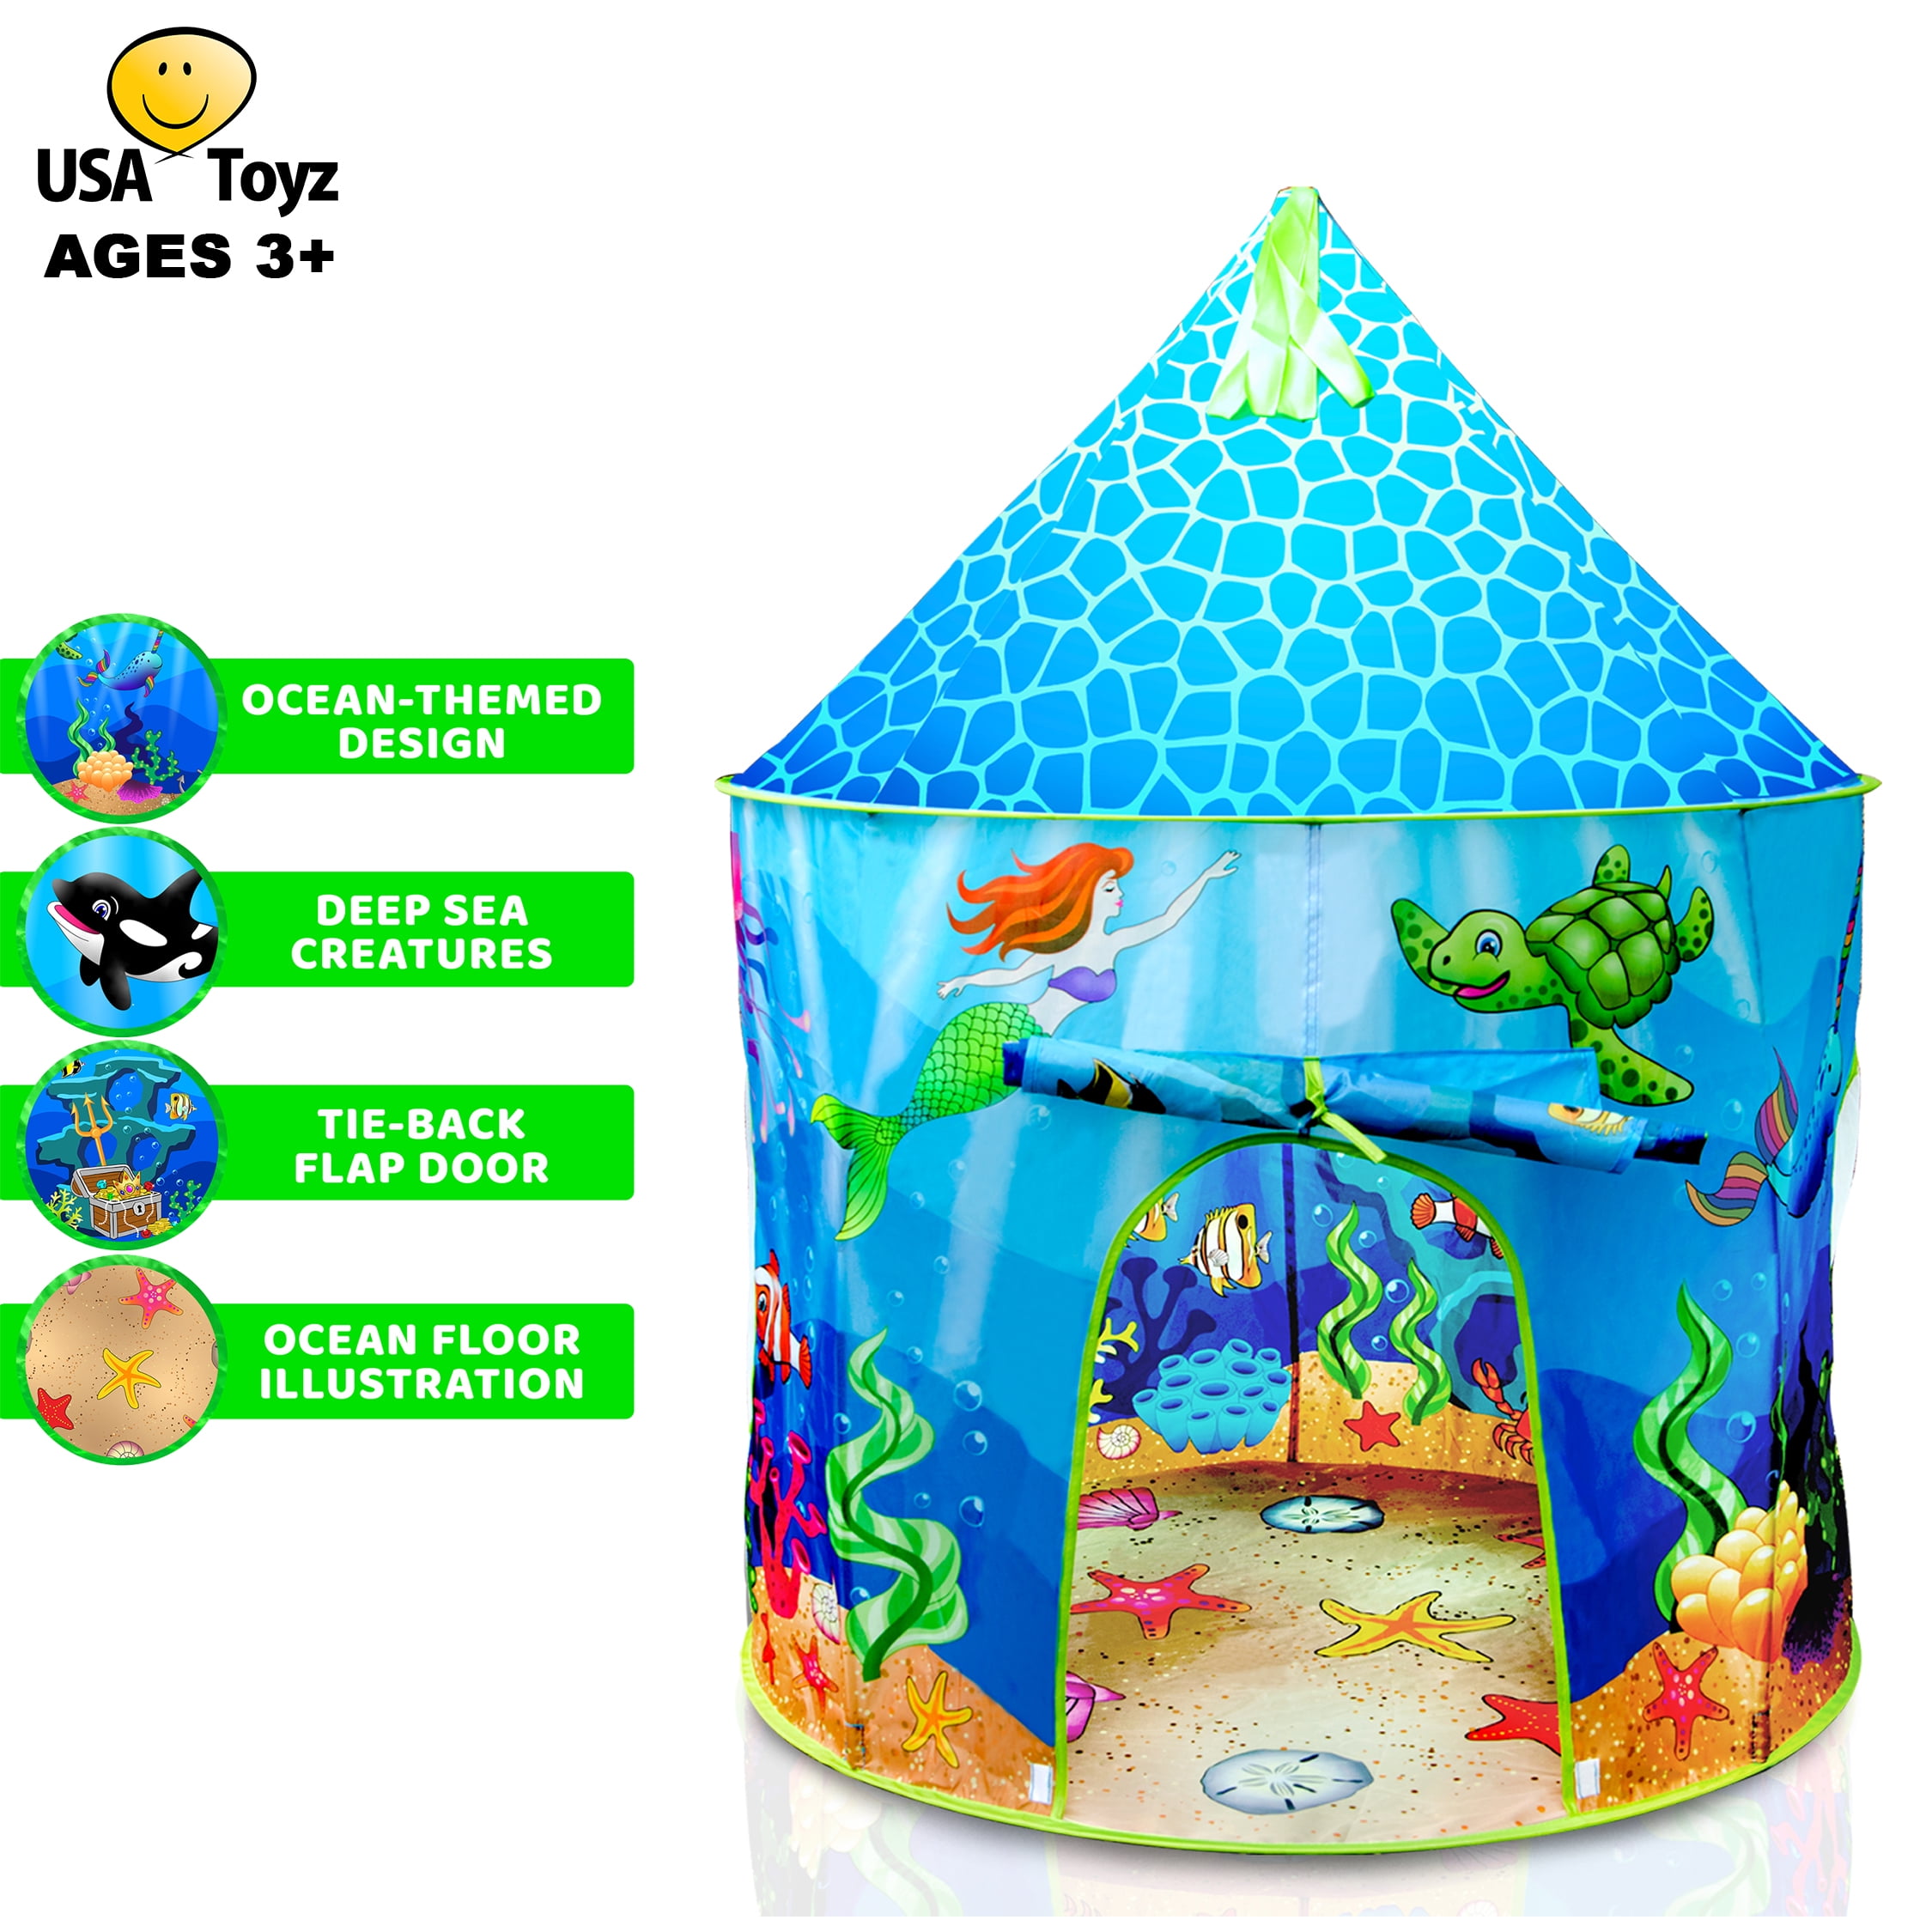 Indoor Playhouse with Pop Up Tent Storage Tote and Kaleidoscope Toy USA Toyz Under The Sea Kids Tent Mermaid Kids Play Tent 